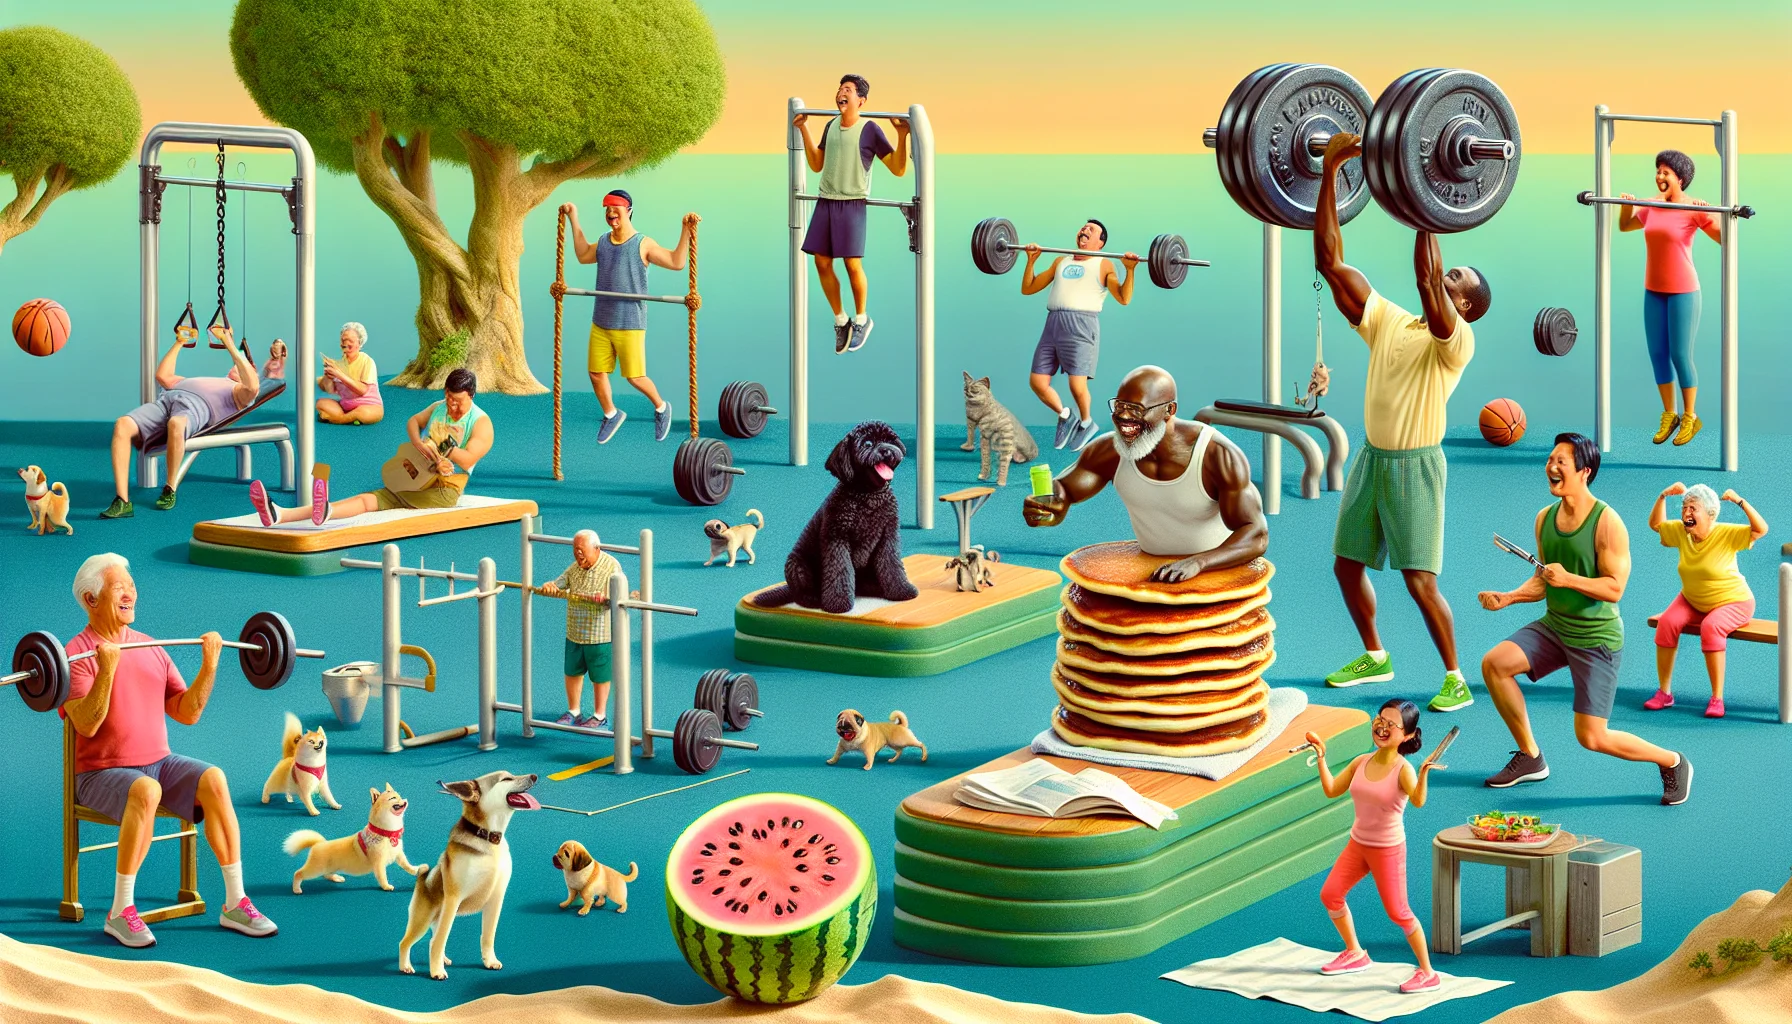 Create a unique scene portraying a humorous scenario of an outdoor gym packed with people of all descents and genders engaged in a weighted calisthenics program. Among the visual elements, include a buffed up middle-aged Black man comically struggling to do pull-ups with pancake stacks as weights, a young White woman giggling while performing handstand pushups against a tree trunk, a Hispanic teenager enhancing his dips workout using a mischievous puppy as the 'weight', and an elderly South Asian lady joyously performing deep squats with watermelons. The goal is to evoke laughter while enticing viewers to exercise.